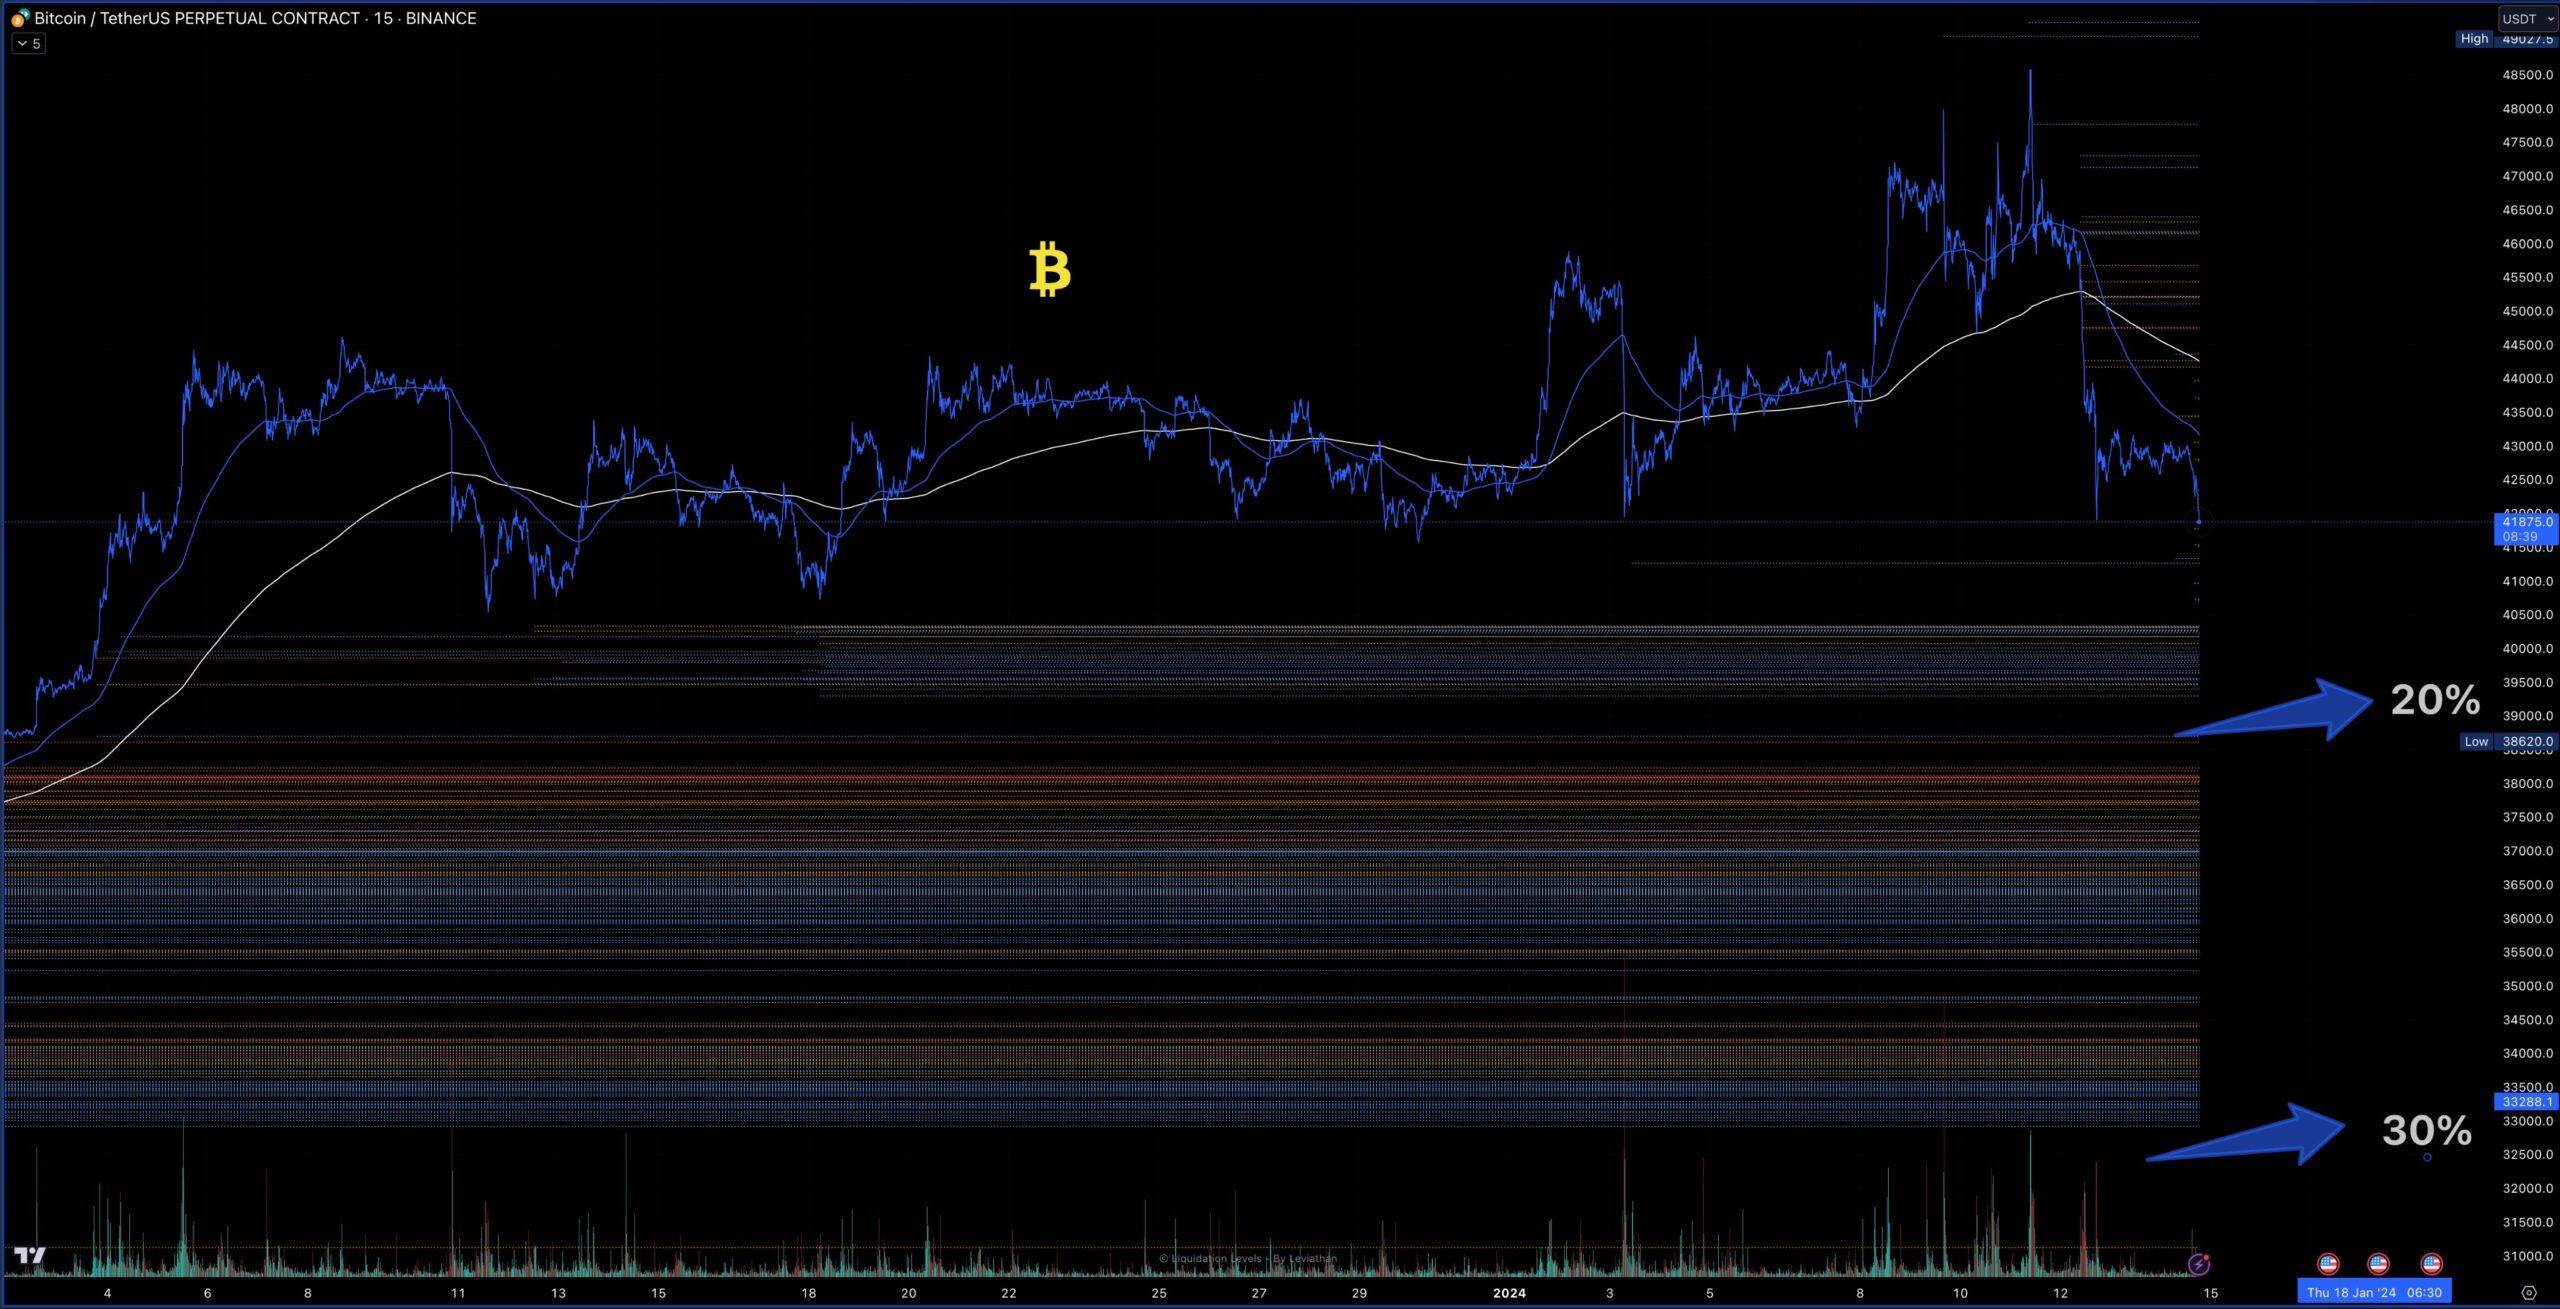 BTC correction targets. Source: X/@martypartymusic